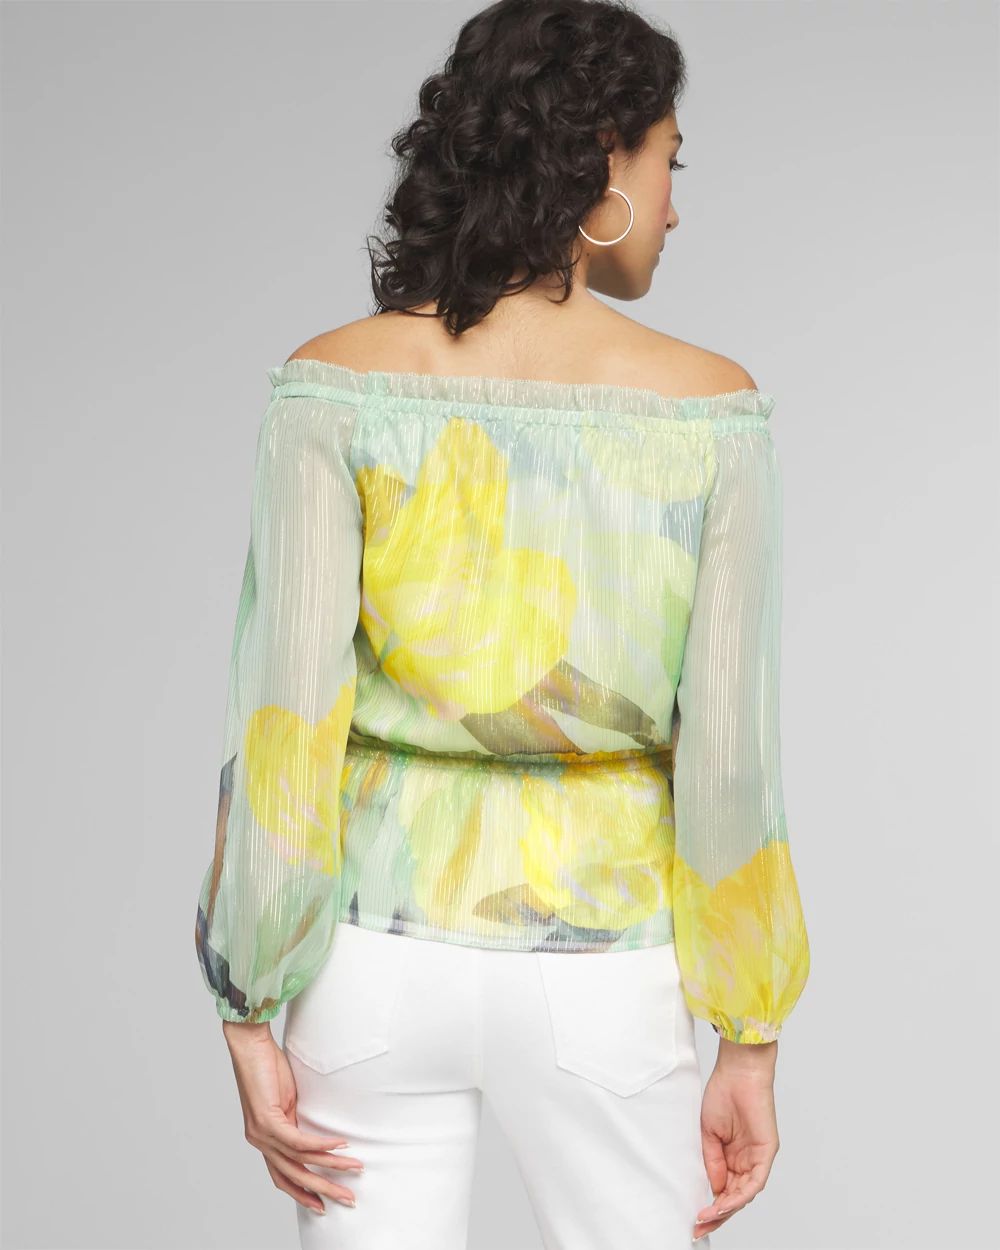 Long Sleeve Off-The-Shoulder Lurex Blouse click to view larger image.